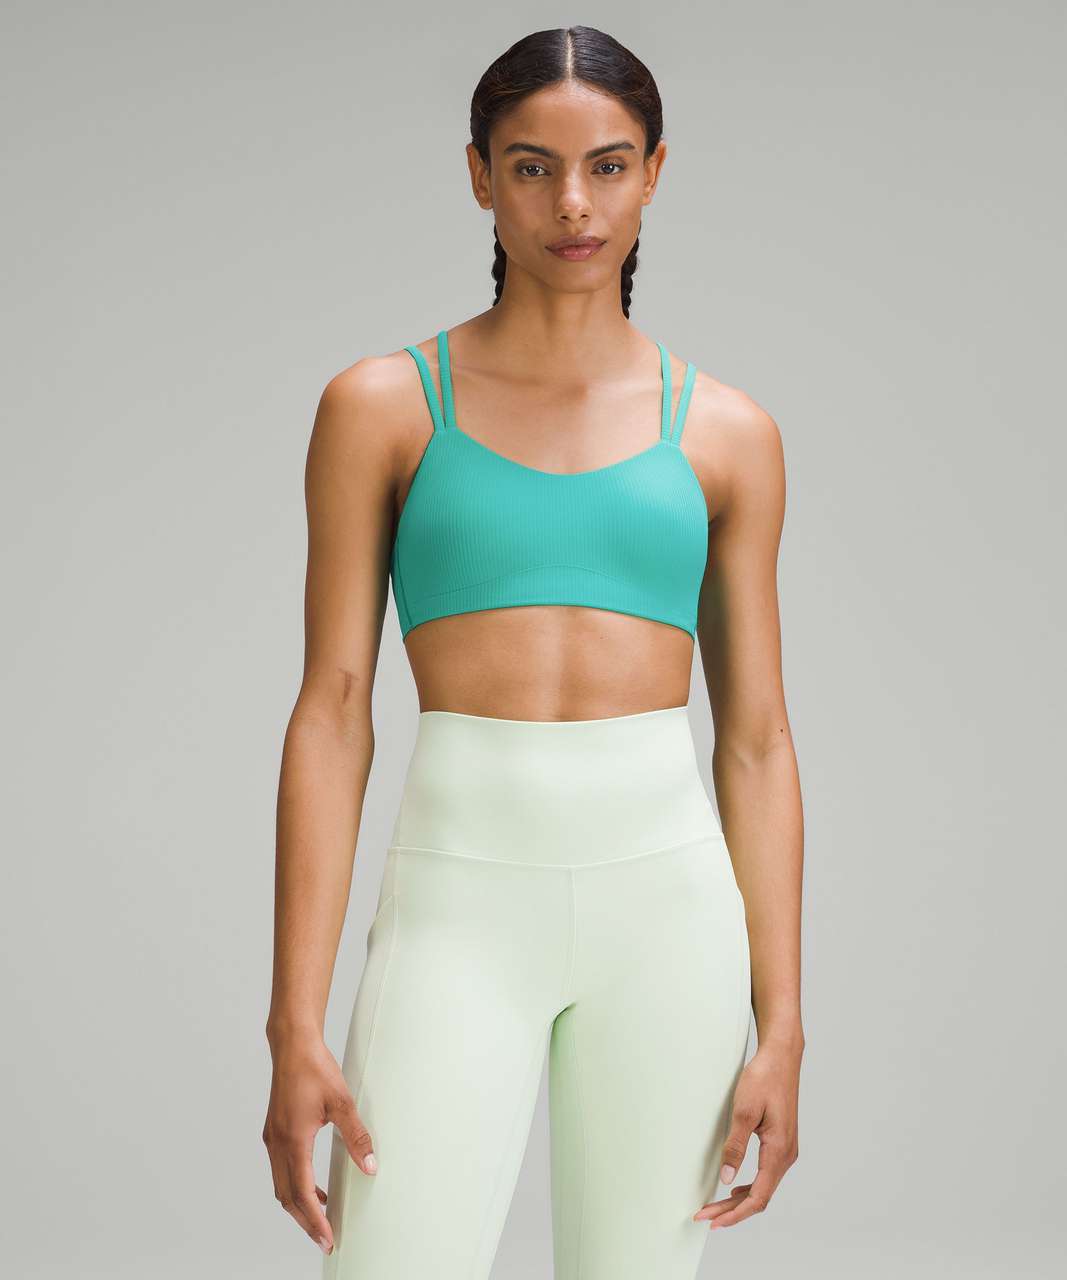 Lululemon Like a Cloud Ribbed Bra *Light Support, B/C Cup - Kelly Green